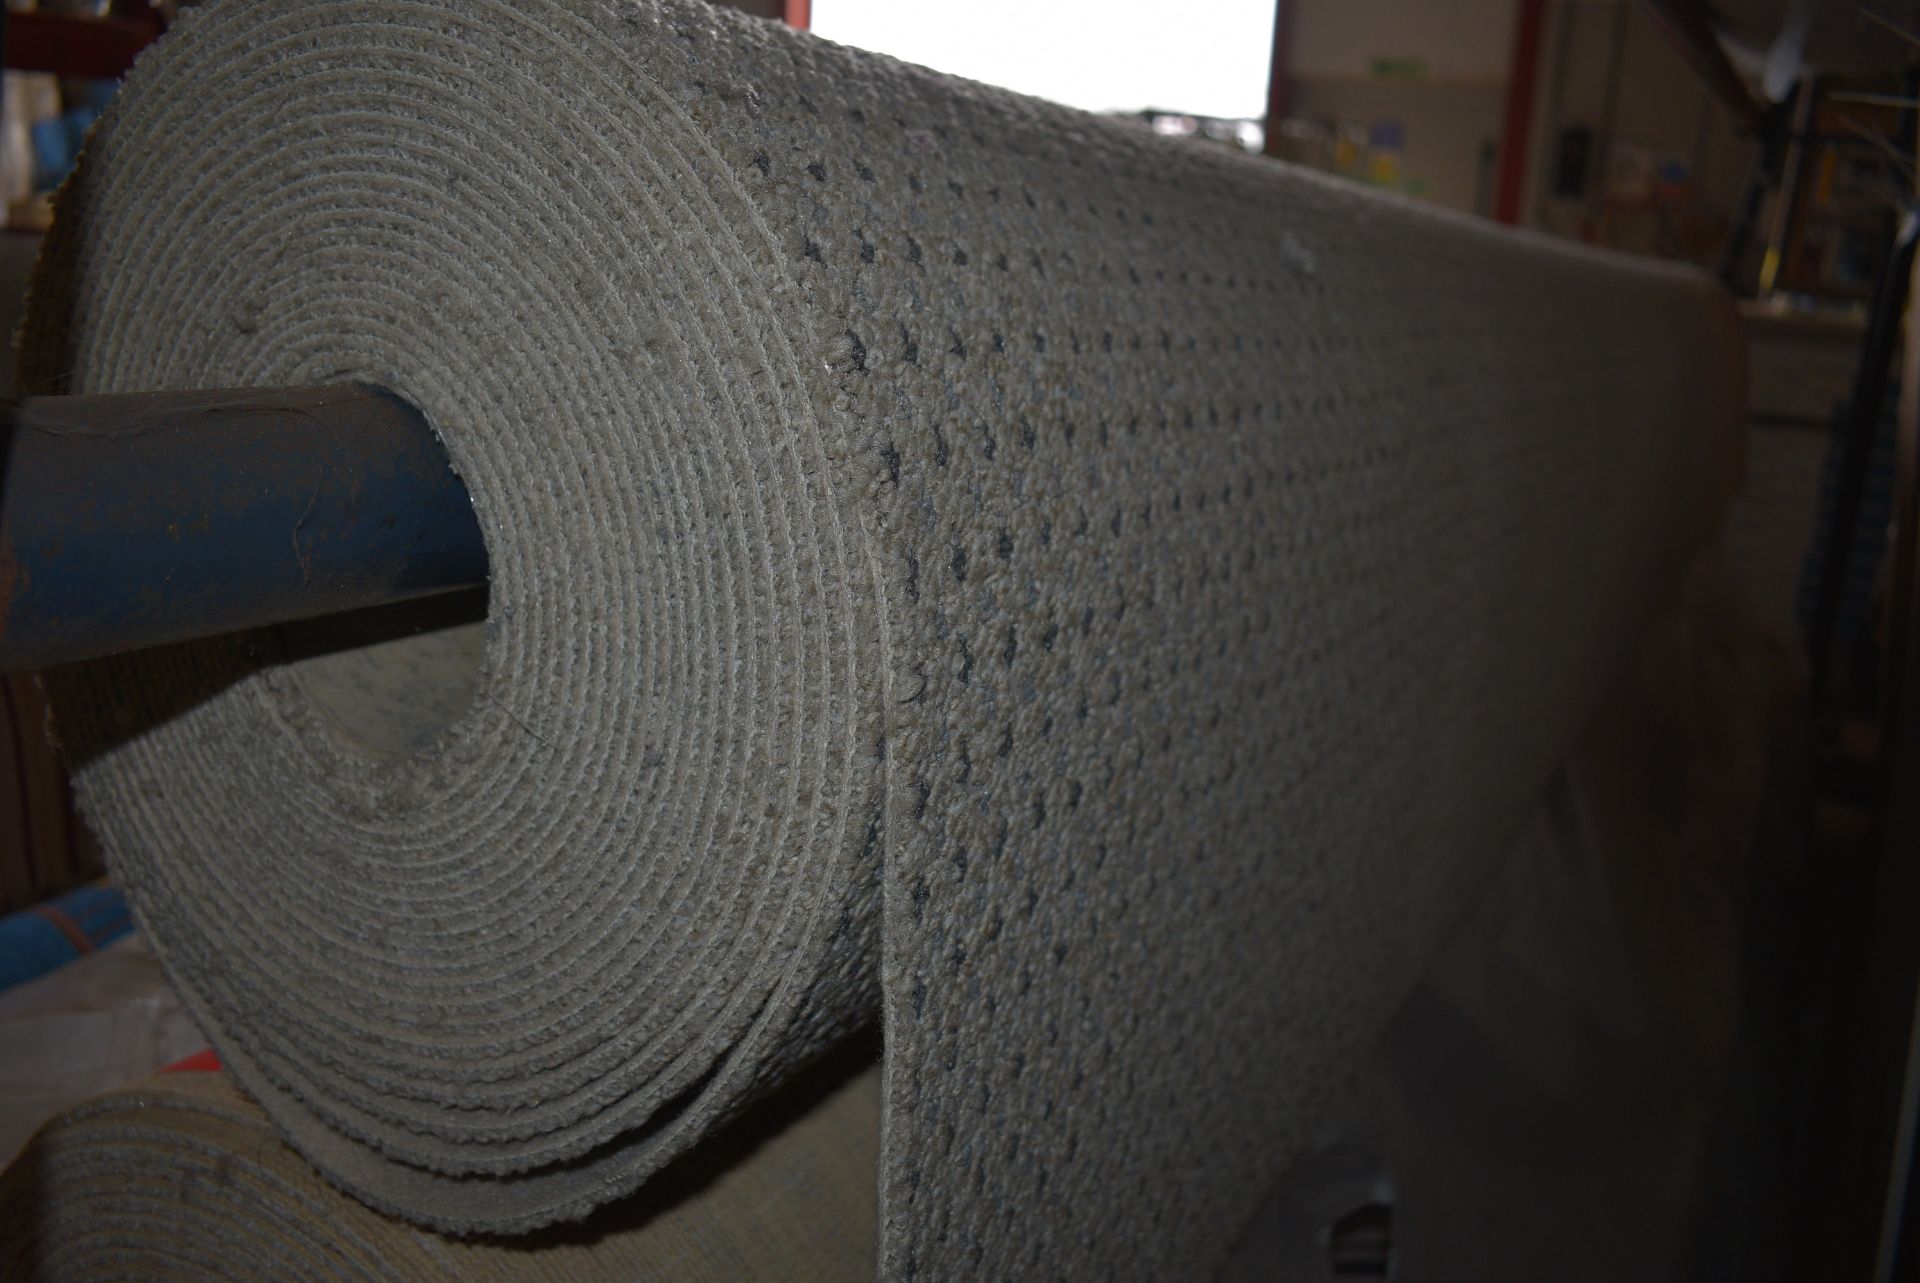 4m Wide Roll of Grey Carpet - Image 2 of 2